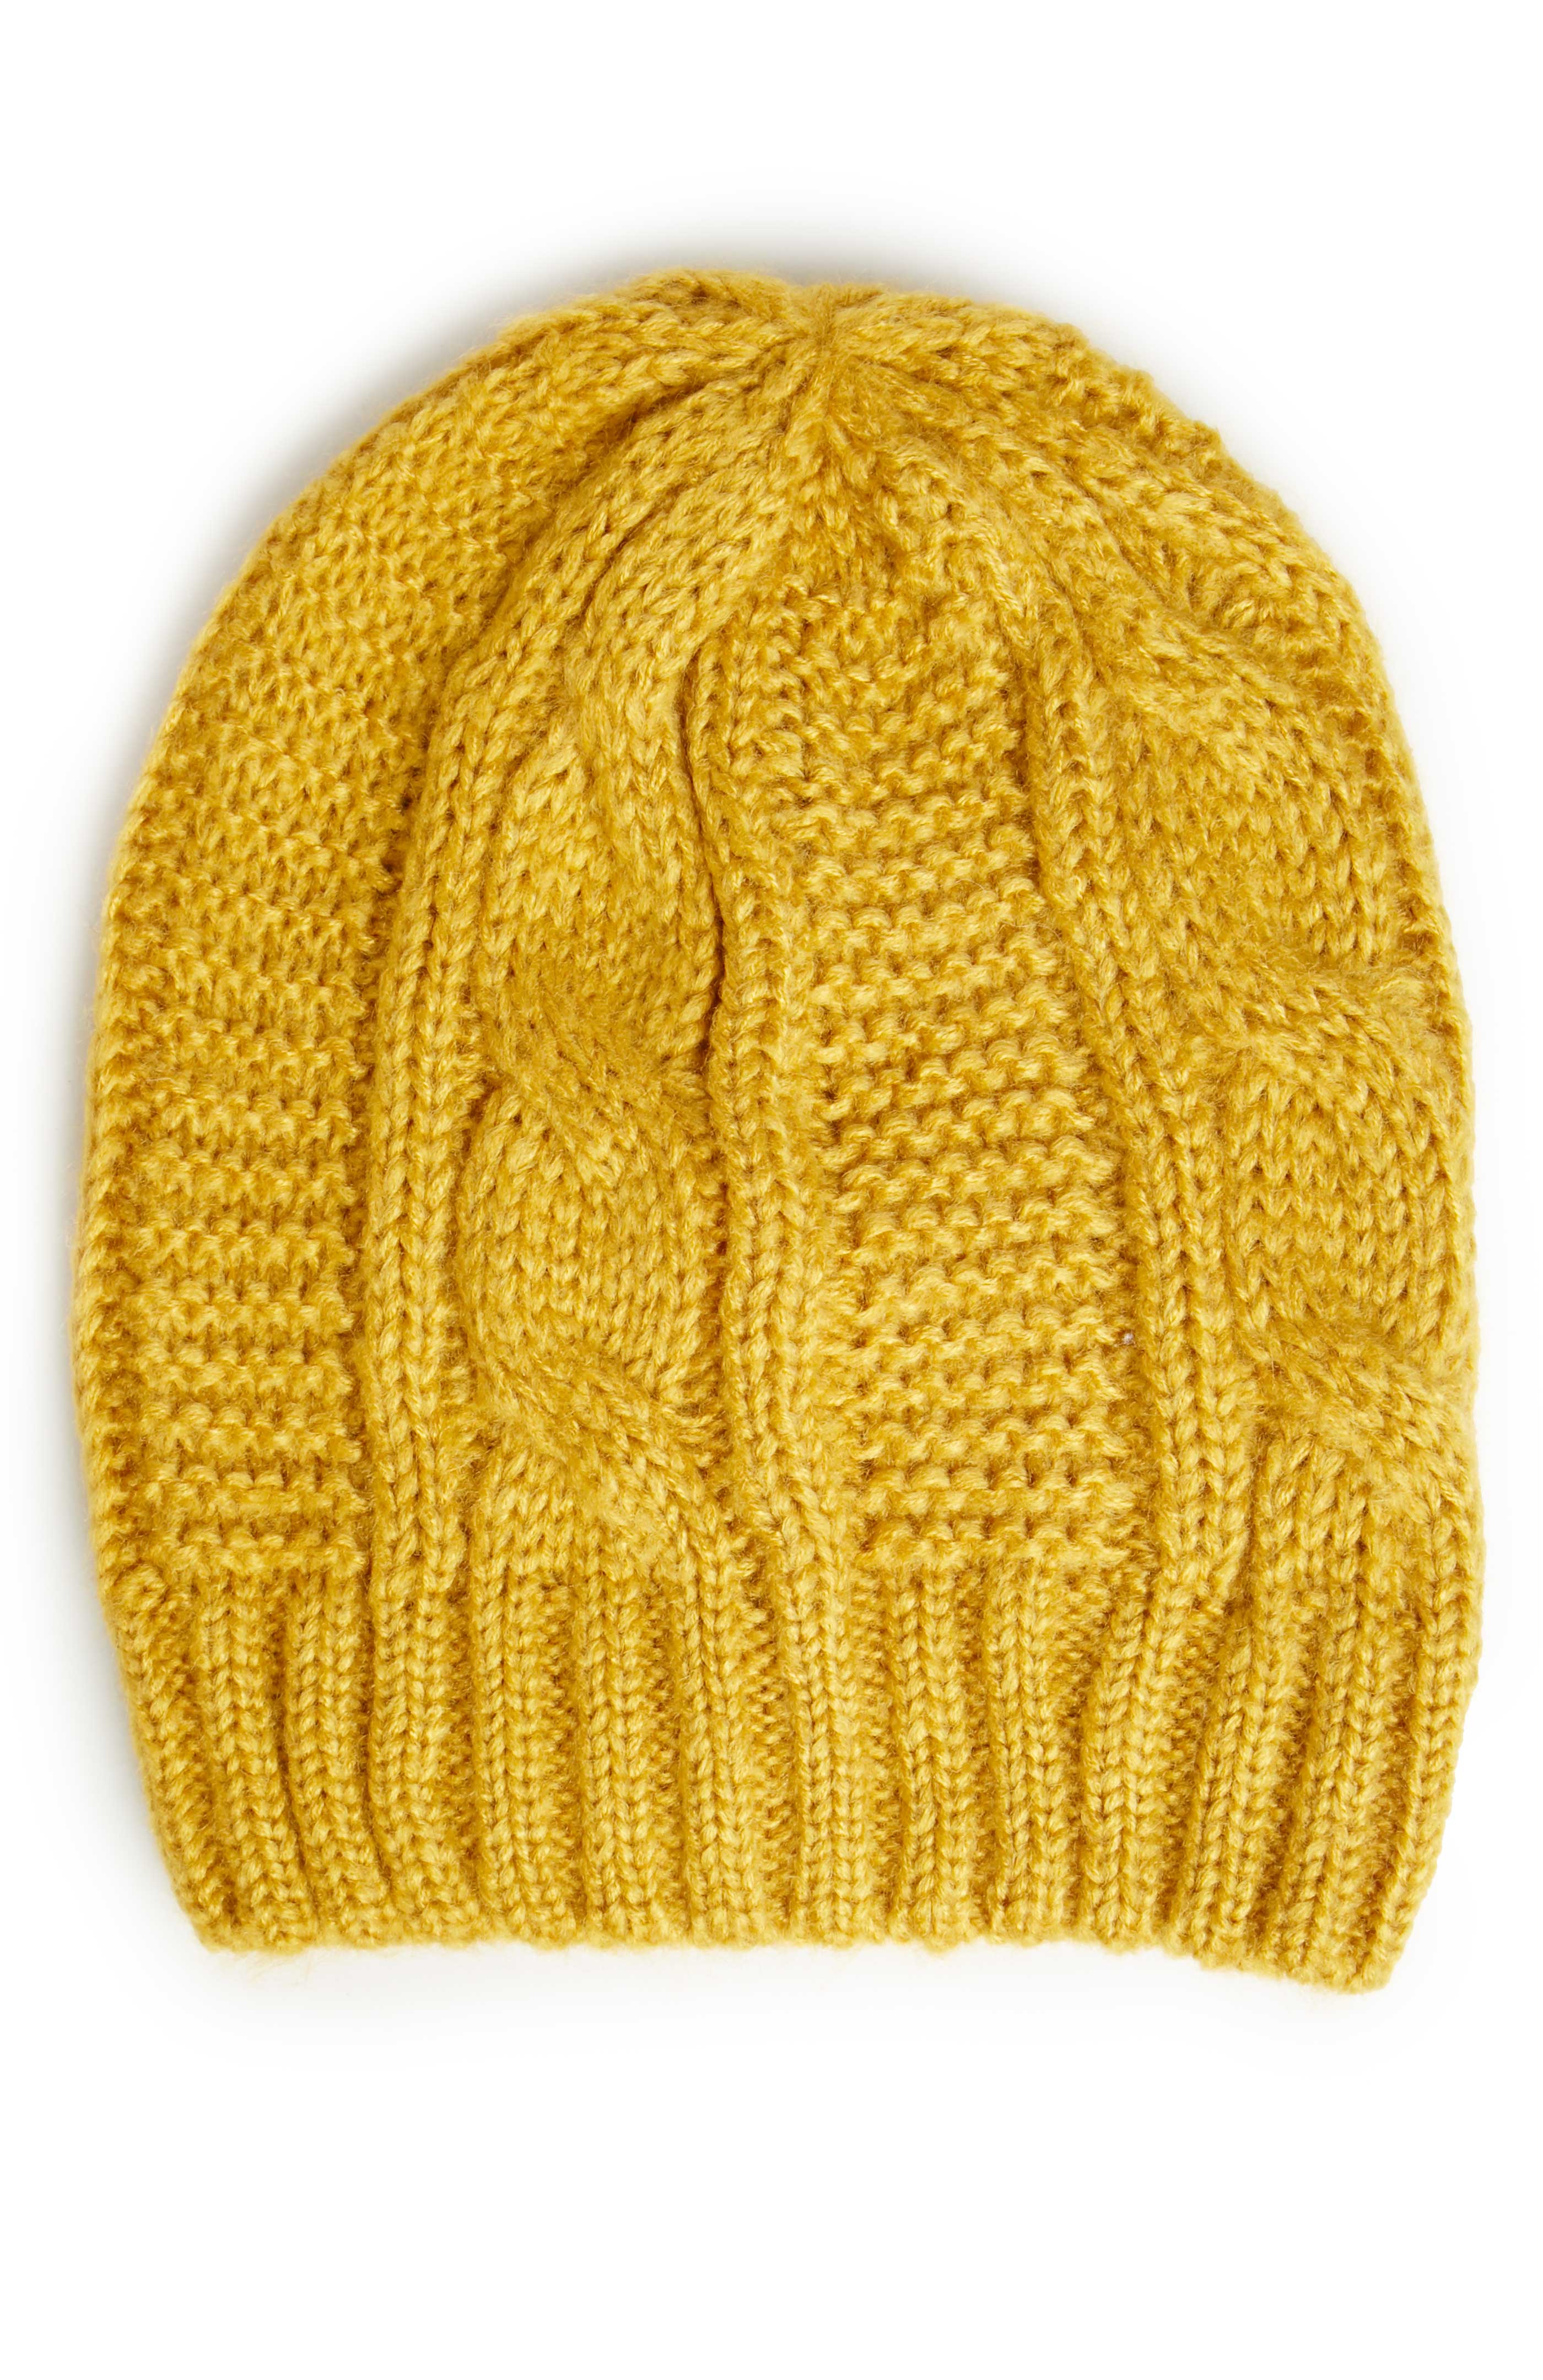 Oversized Cable Knit Beanie in Mustard | DAILYLOOK